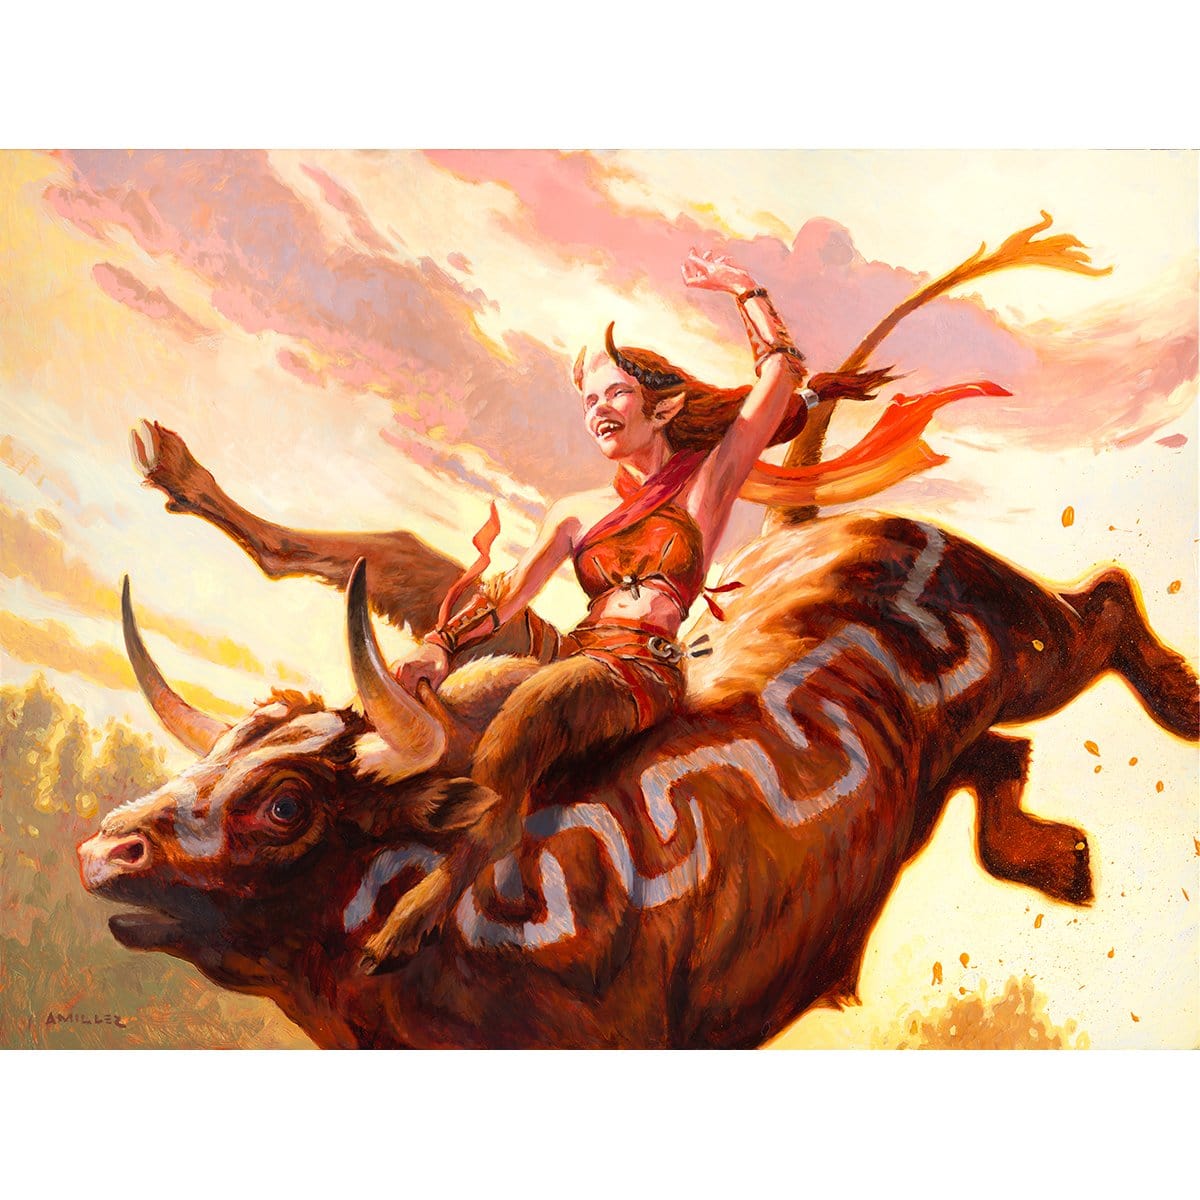 Stampede Rider Print - Print - Original Magic Art - Accessories for Magic the Gathering and other card games